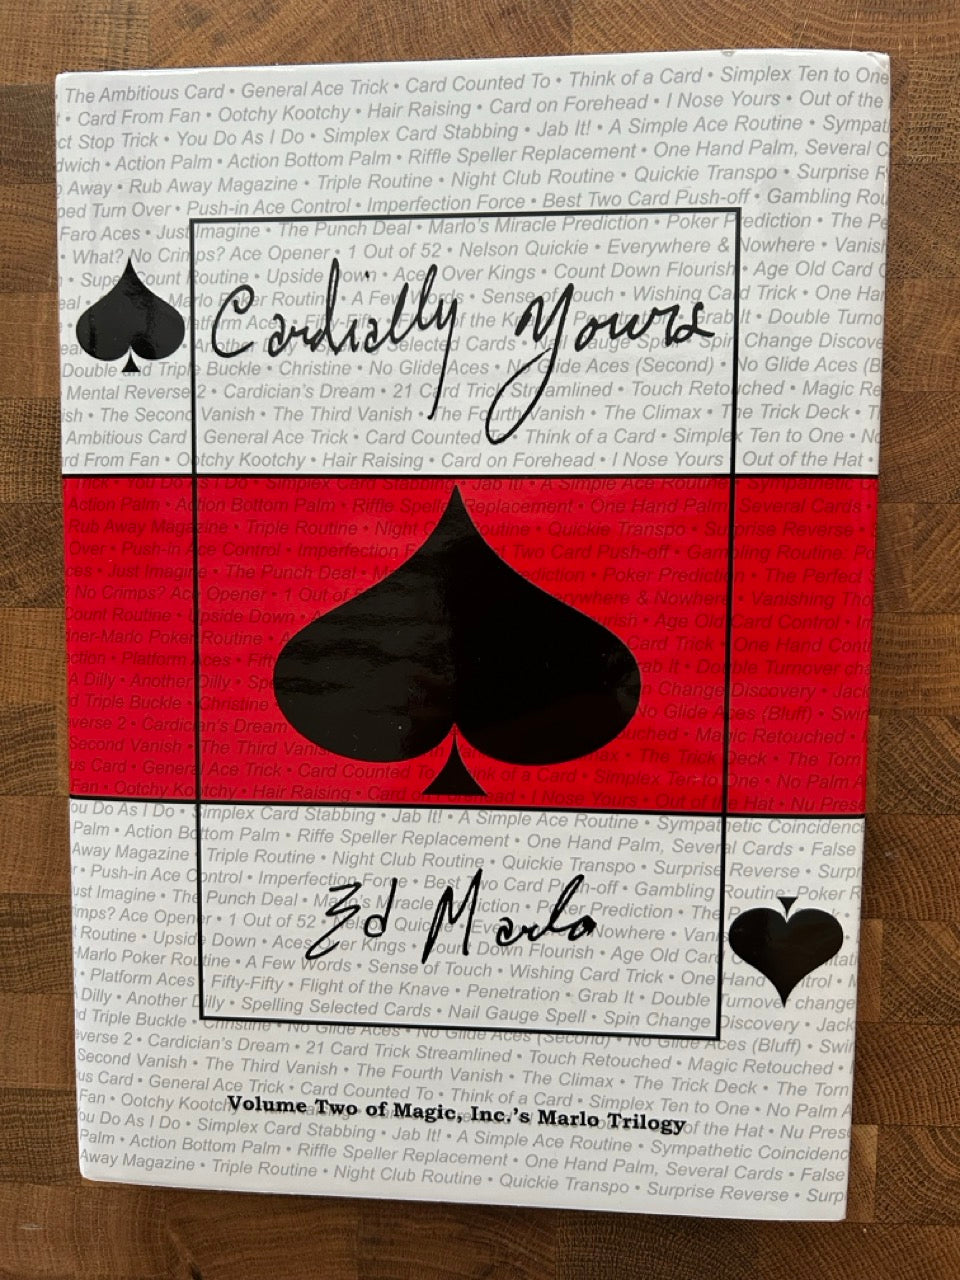 Cardially Yours - Ed Marlo